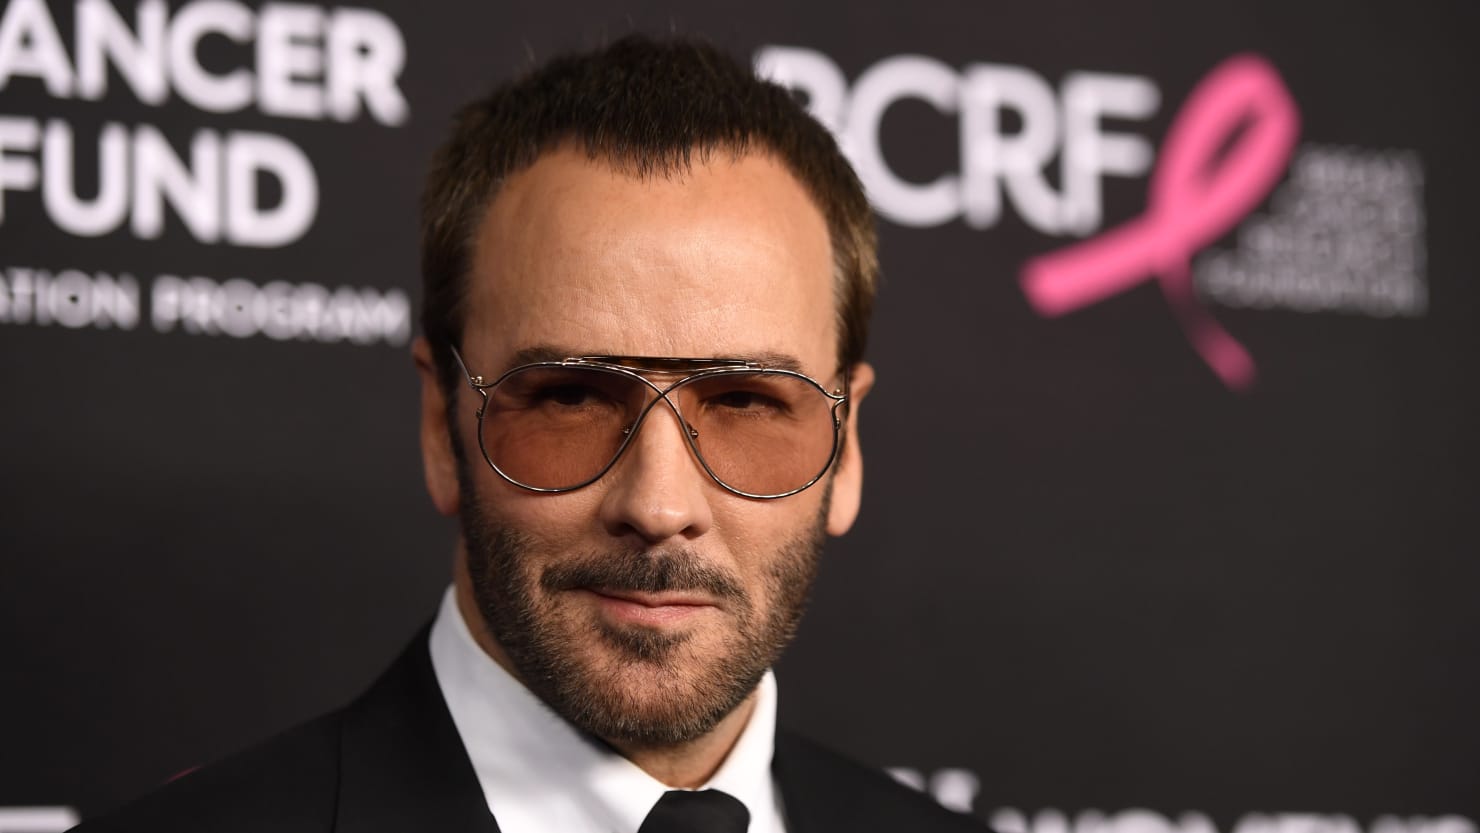 munitie zout oog Legendary Designer Tom Ford Says 'House of Gucci' Made Him 'Deeply Sad'